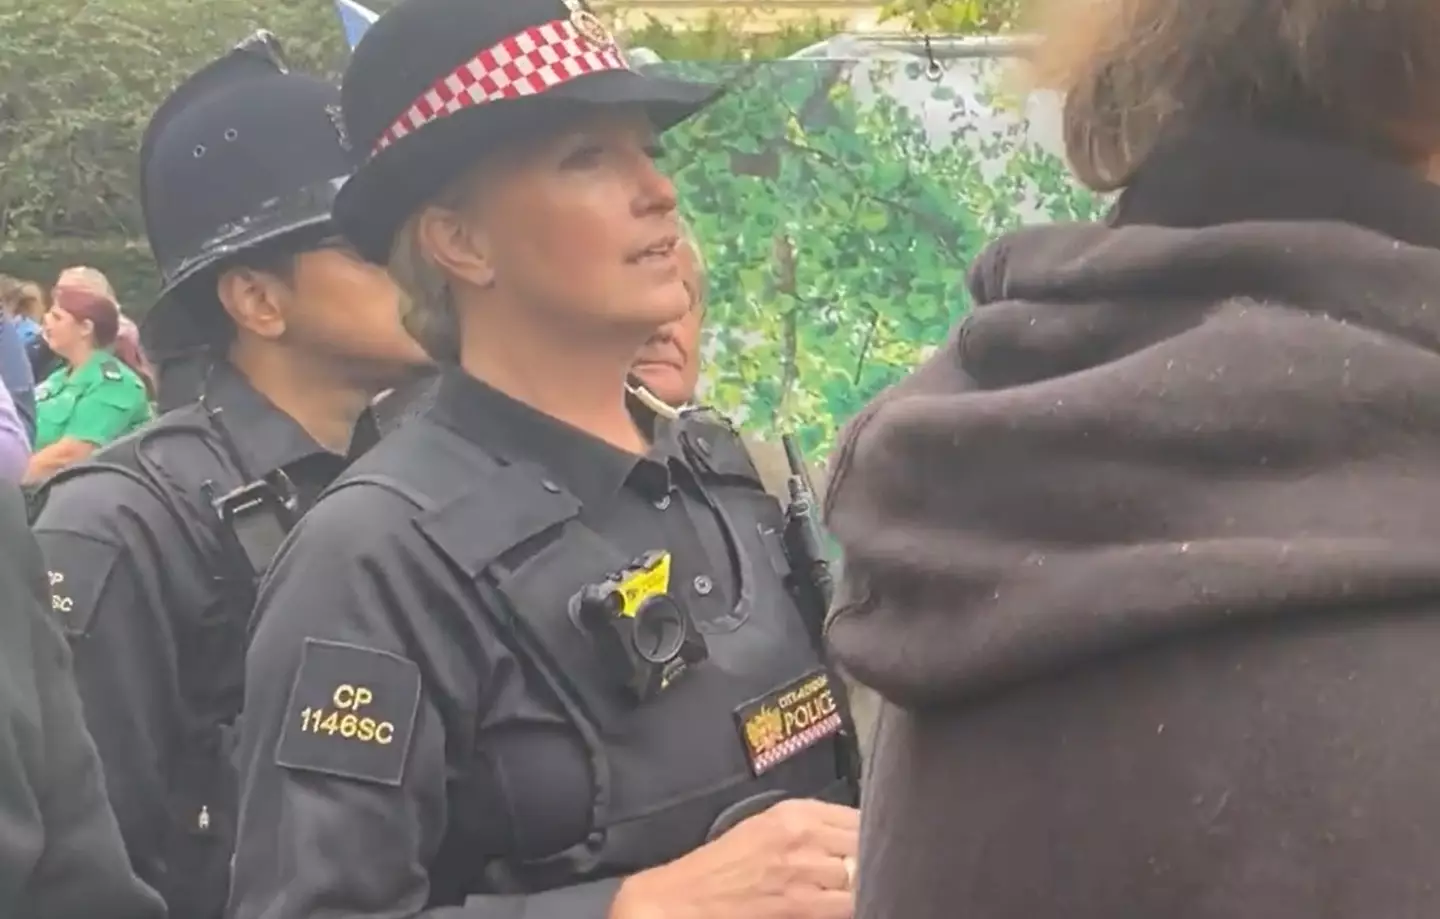 Penny Lancaster was spotted in London working as a police officer.